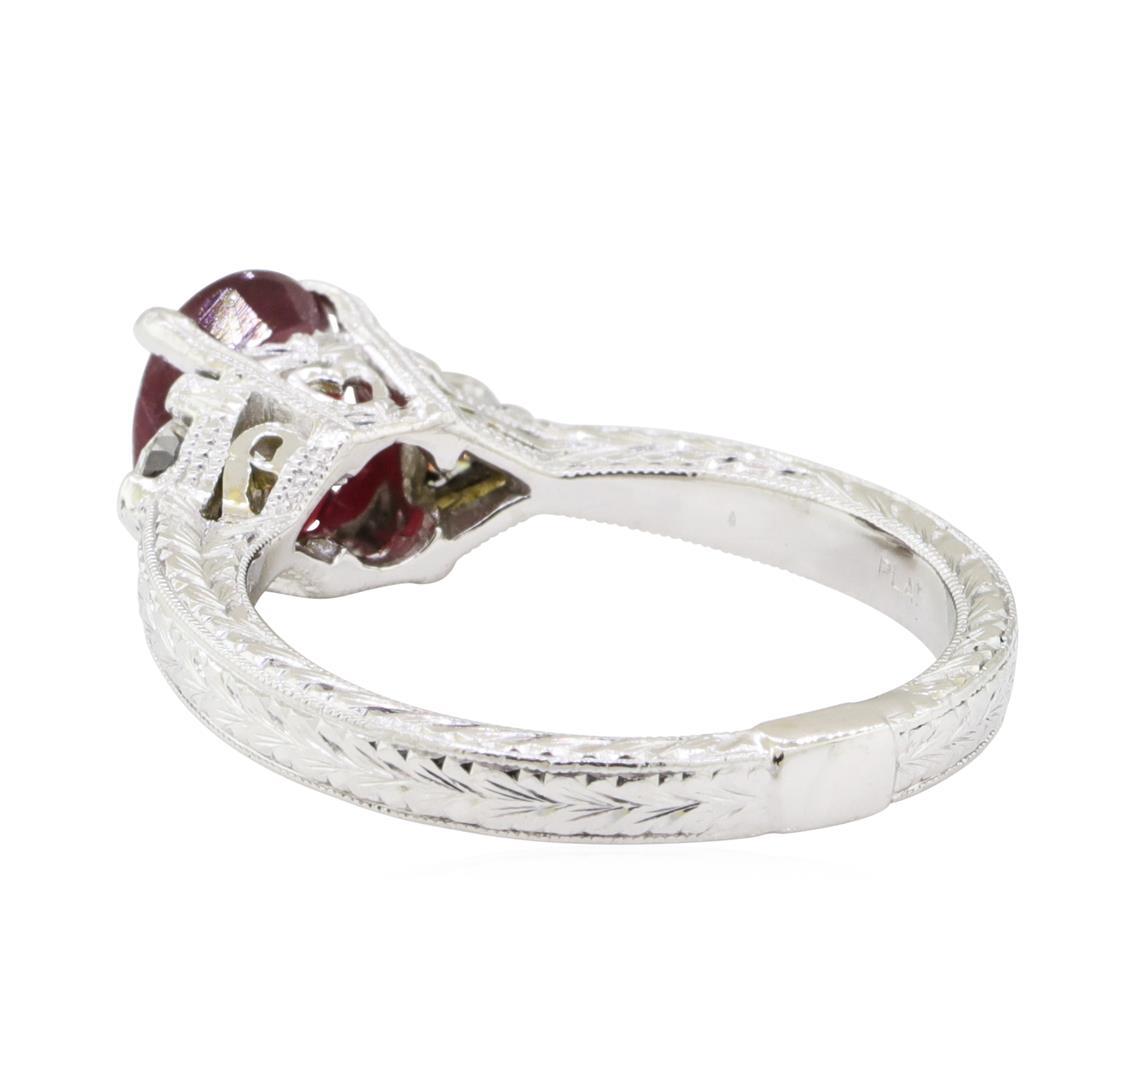 2.40 ctw Ruby and Diamond Ring - 18KT White Gold